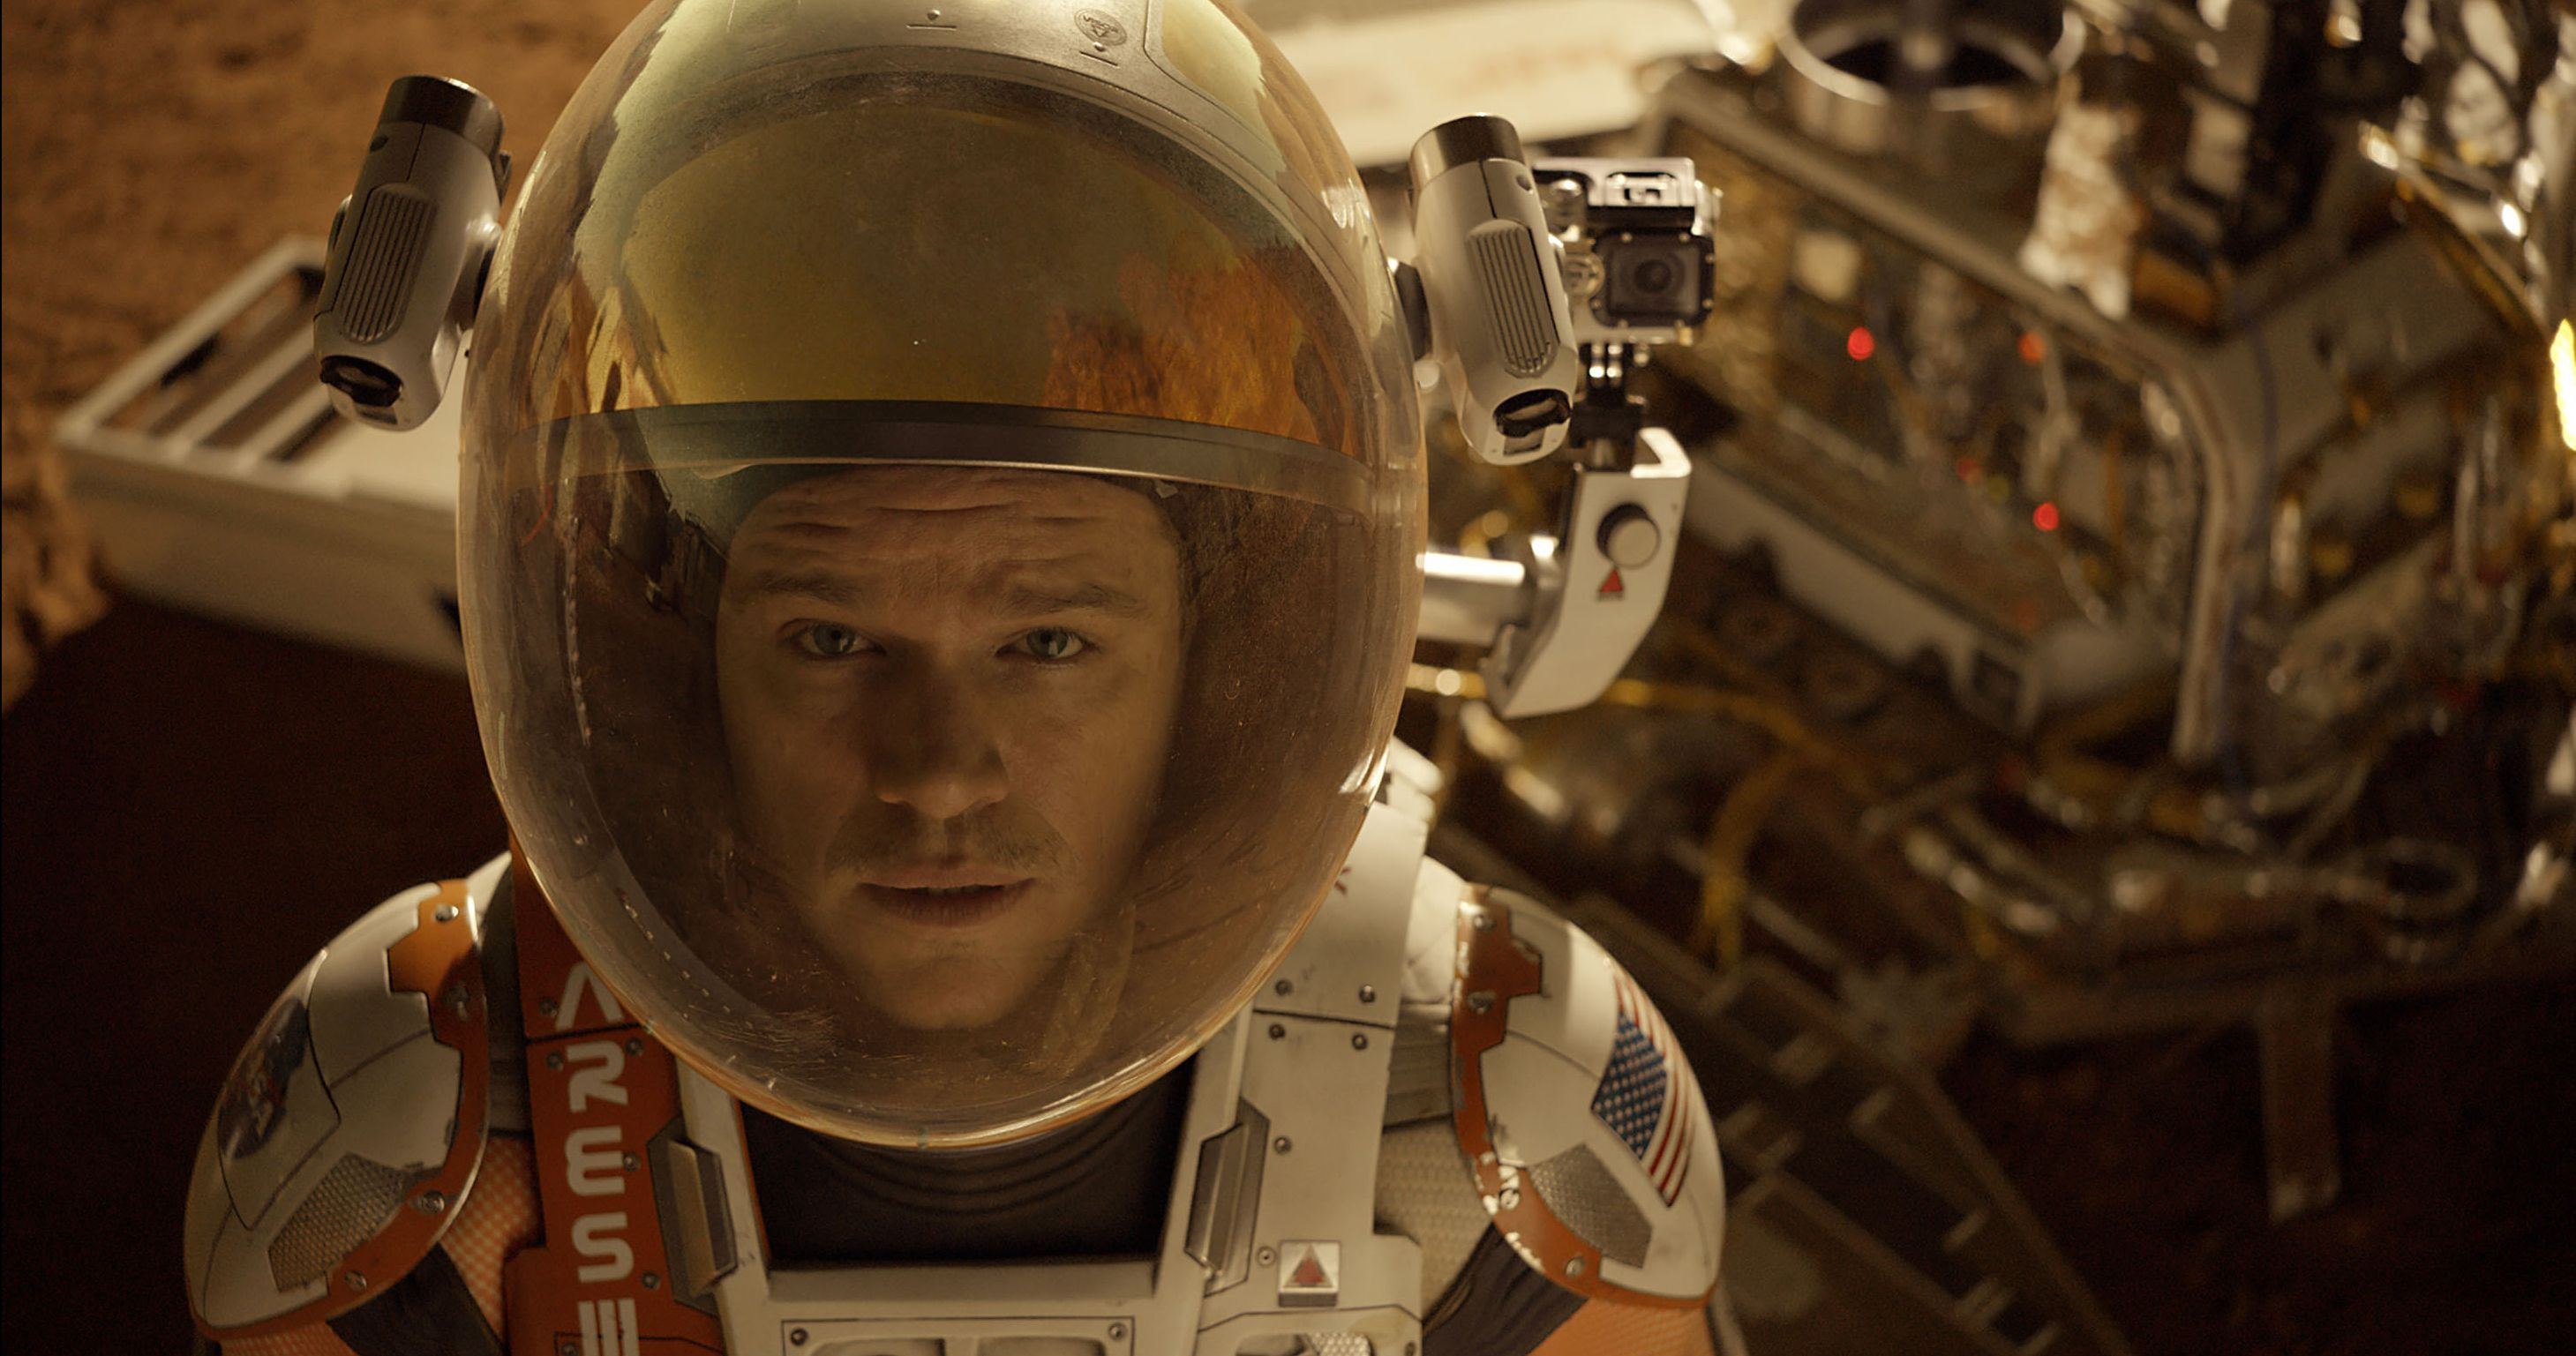 The Martian Movie Images Feature Matt Damon in Space | Collider